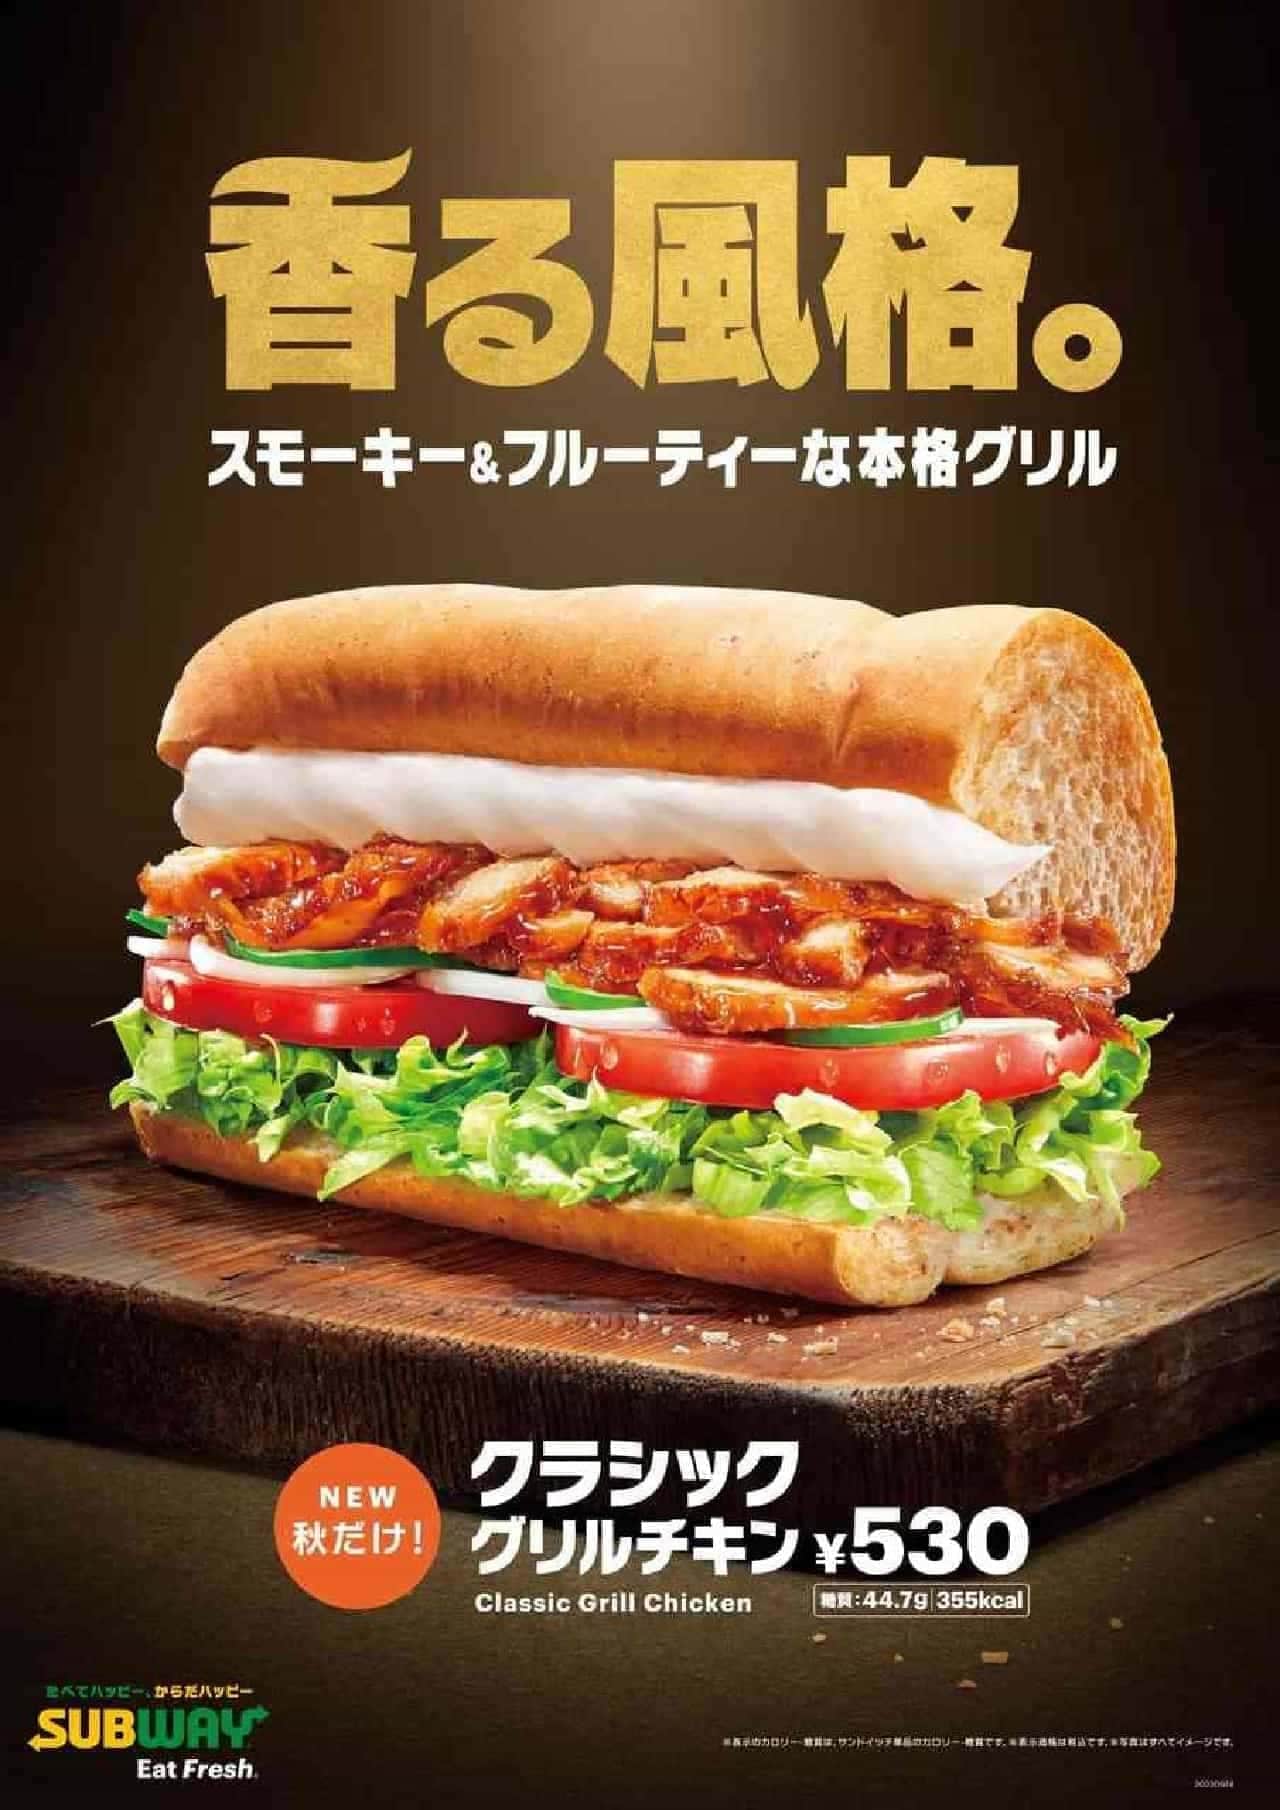 Subway "Classic Grilled Chicken